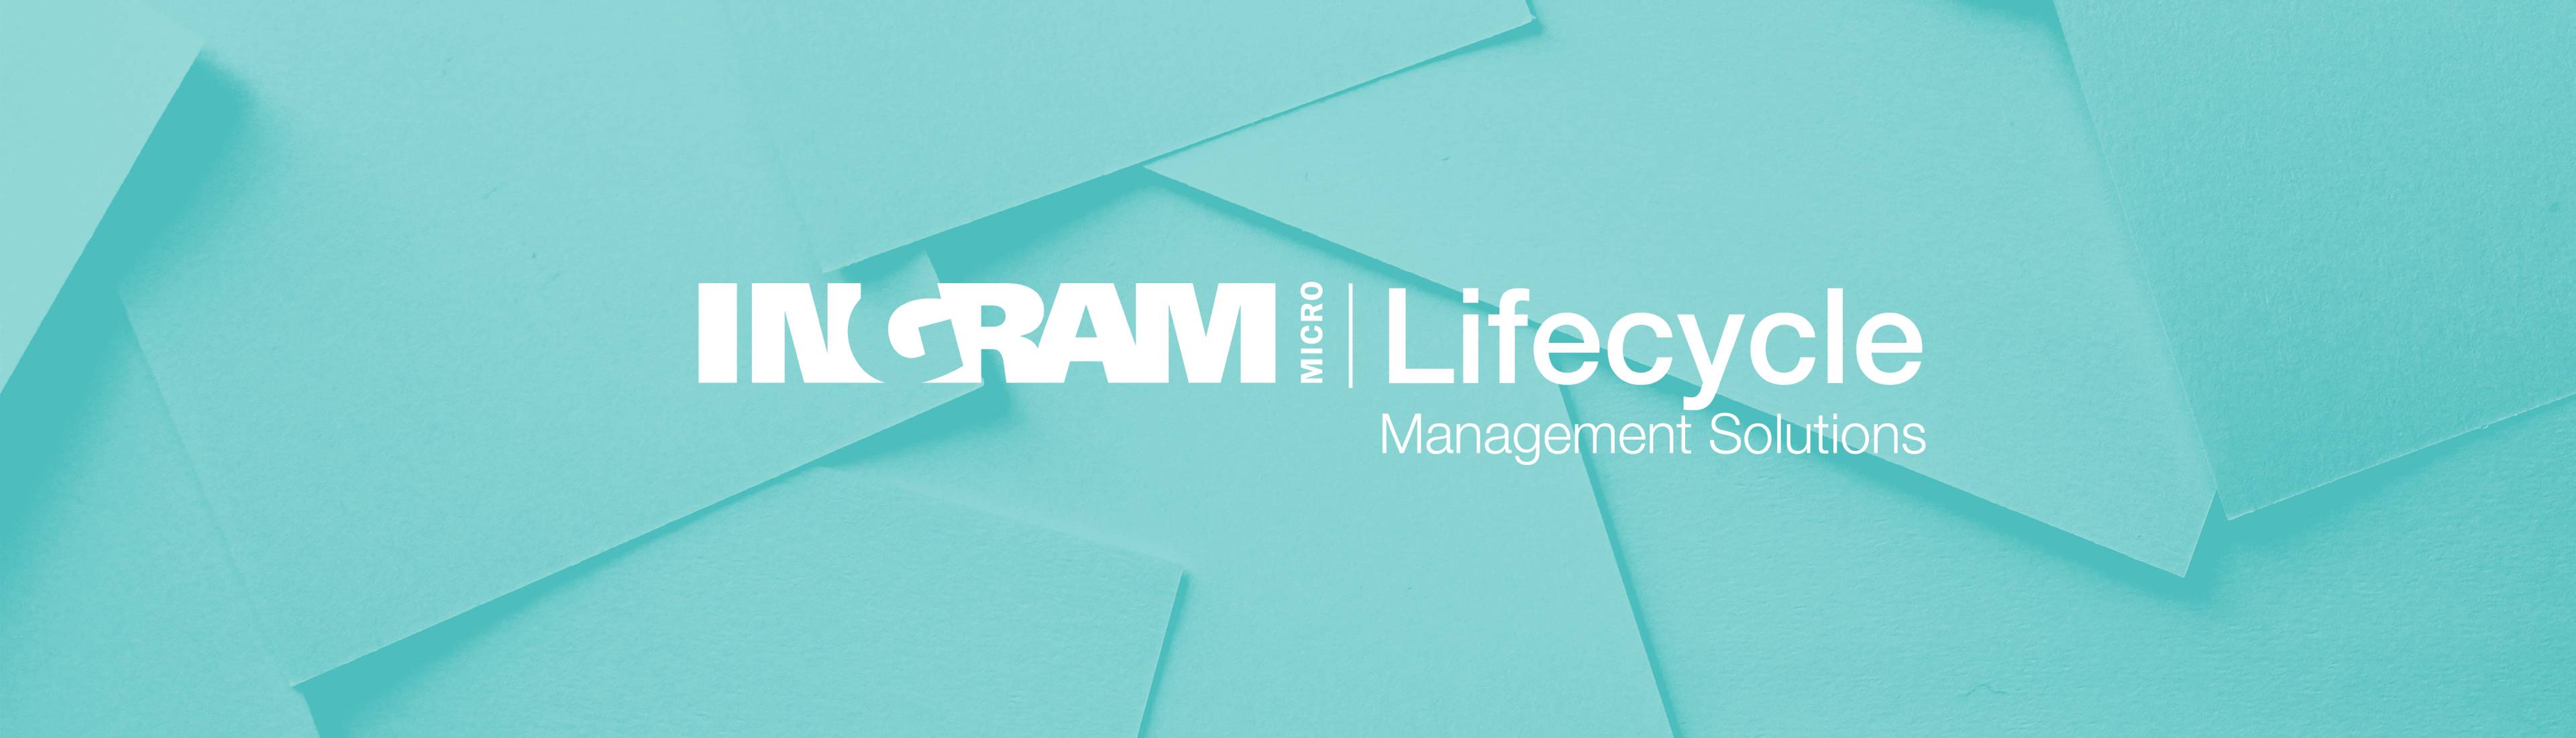 Lifecycle Management Solutions